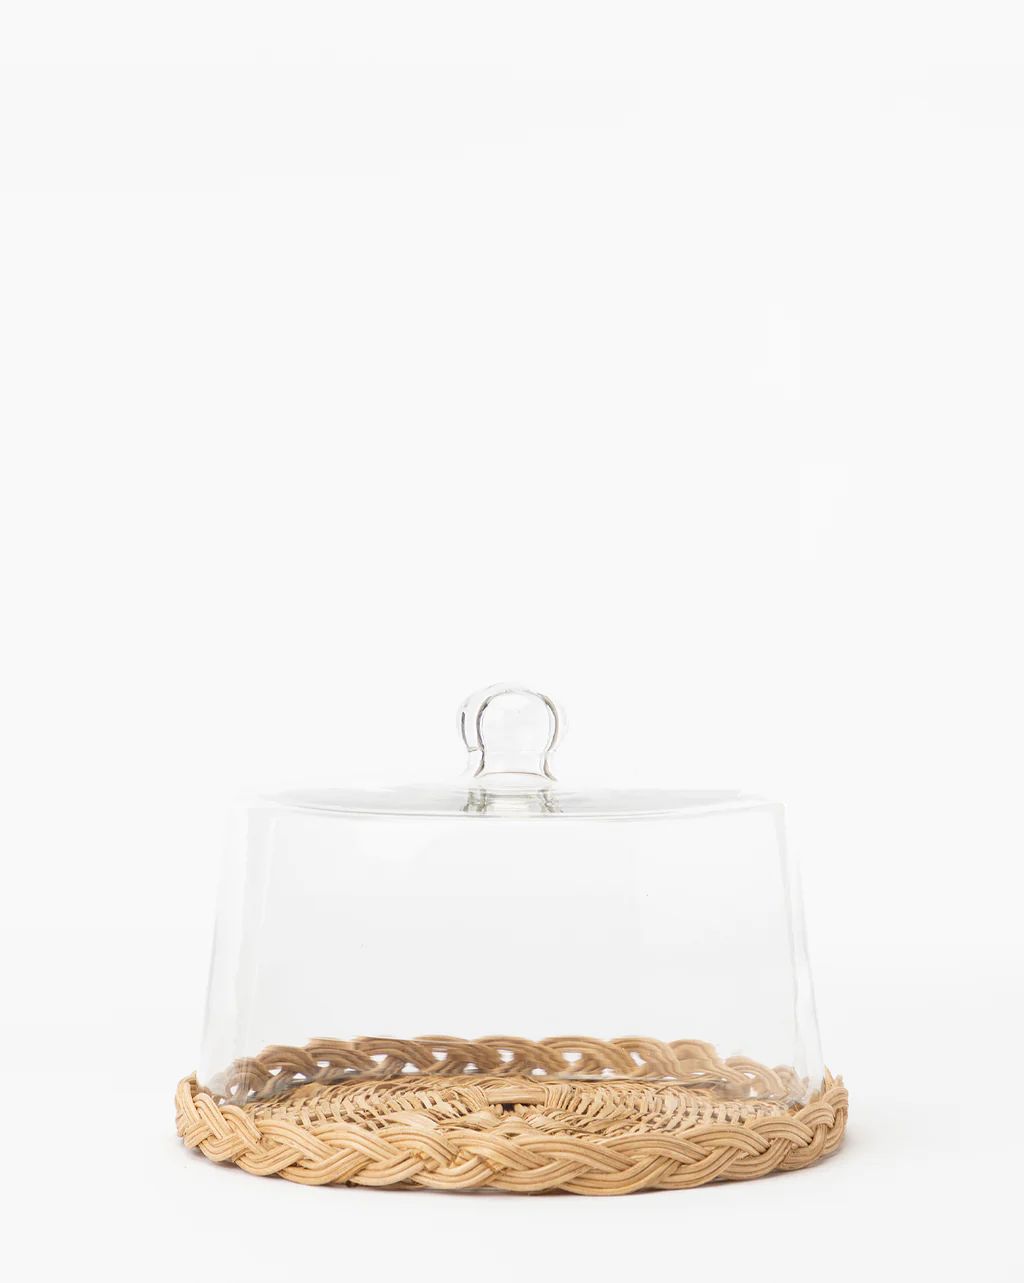 Woven Cane Pastry Cloche | McGee & Co.